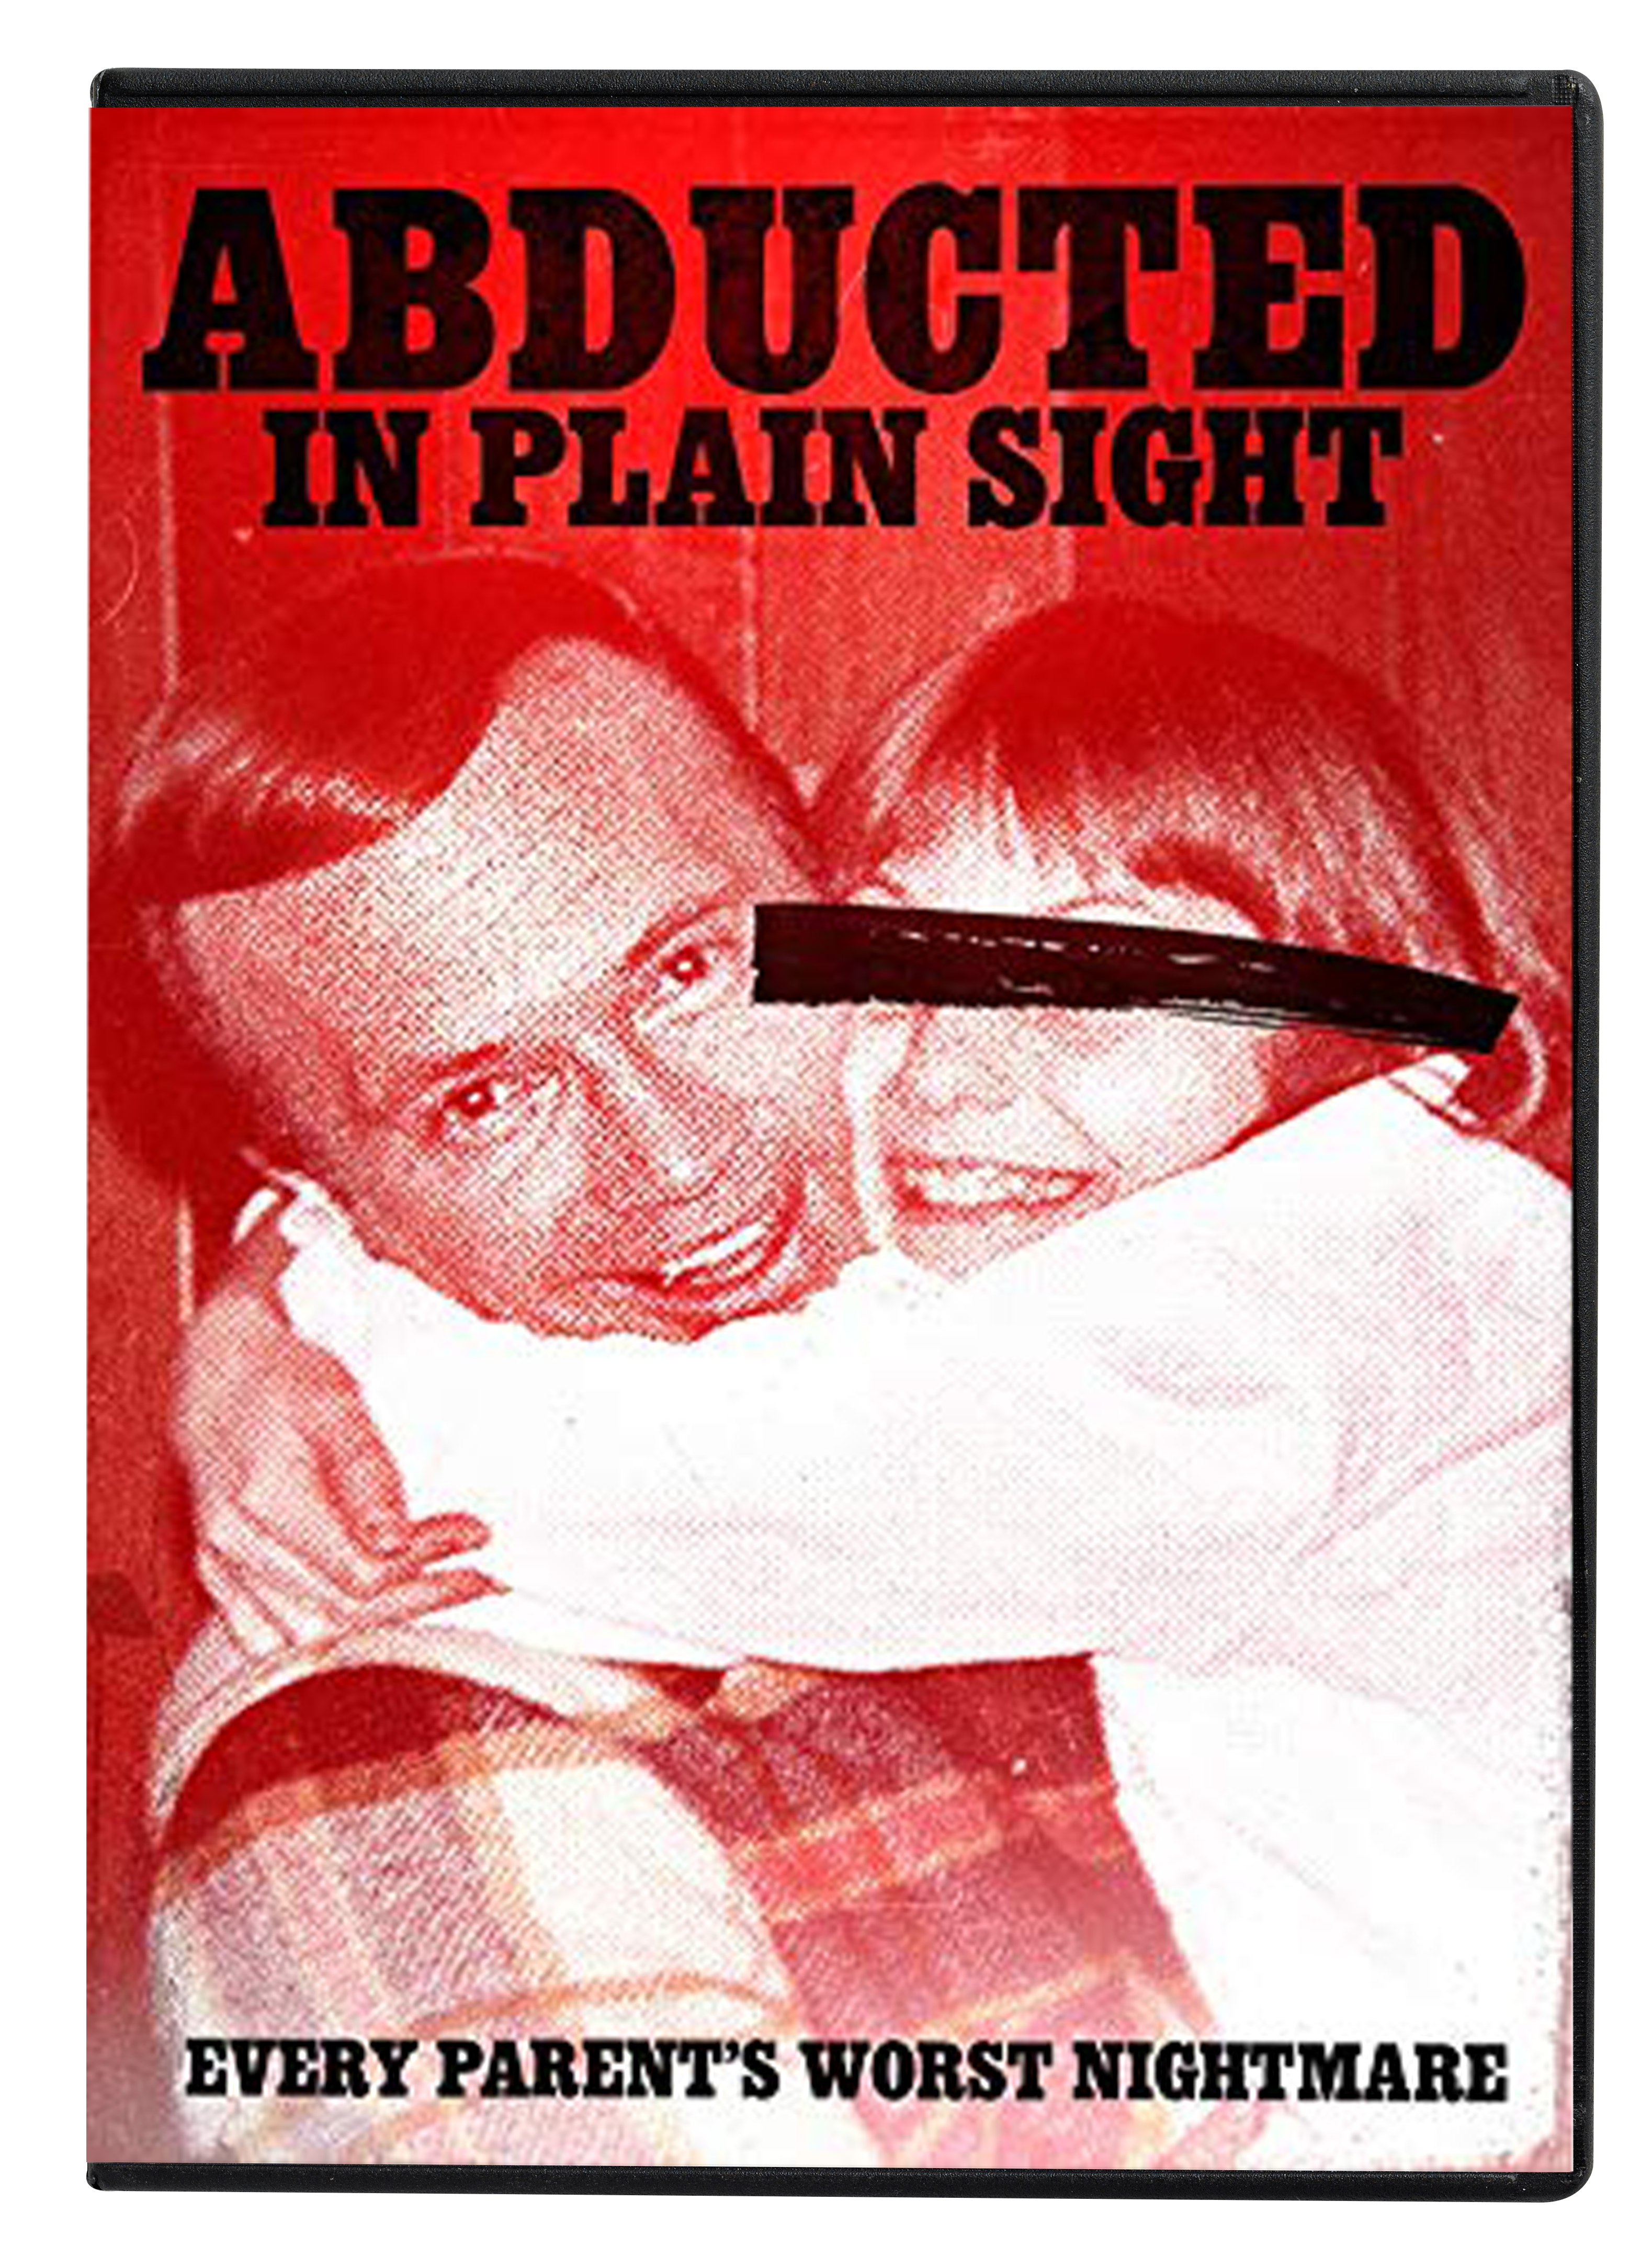 Abducted in plain sight